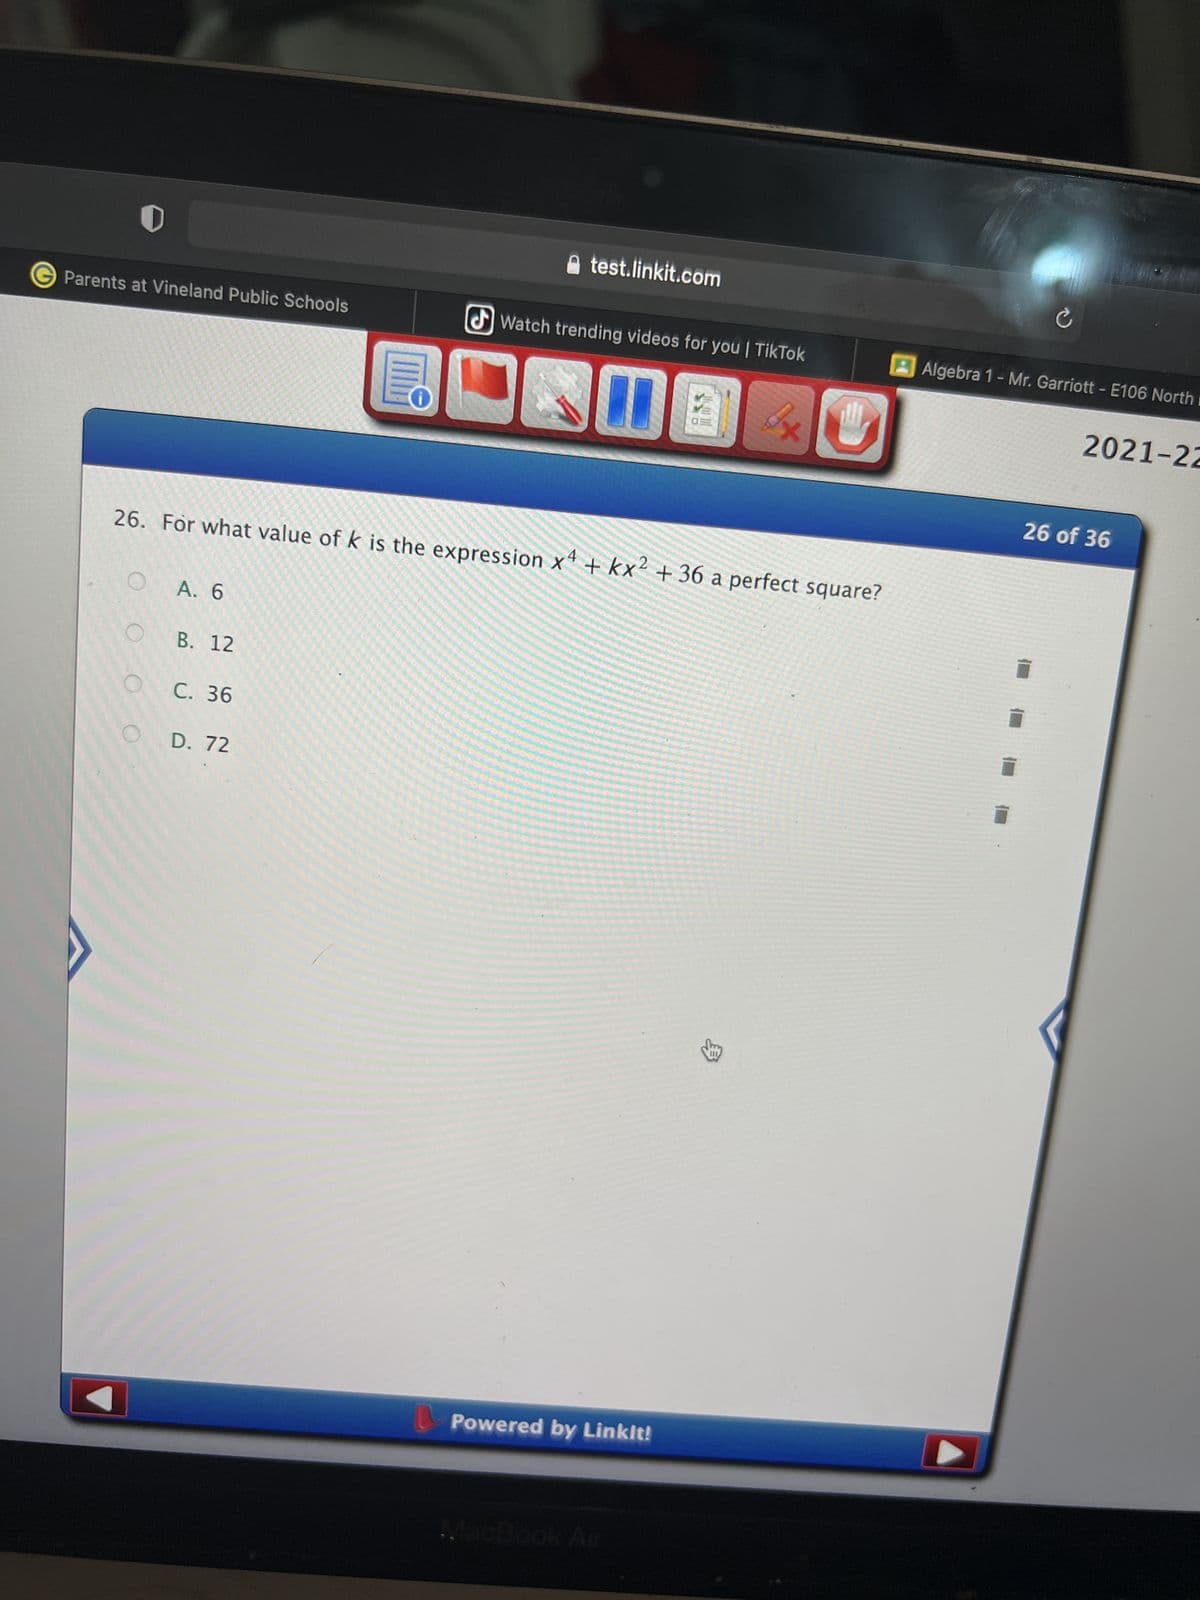 0
GParents at Vineland Public Schools
test.linkit.com
Watch trending videos for you | TikTok
10
11
It
26. For what value of k is the expression x4 + kx2 + 36 a perfect square?
A. 6
B. 12
C. 36
D. 72
Powered by Linkit!
Ć
Algebra 1 - Mr. Garriott - E106 North
2021-22
10
26 of 36